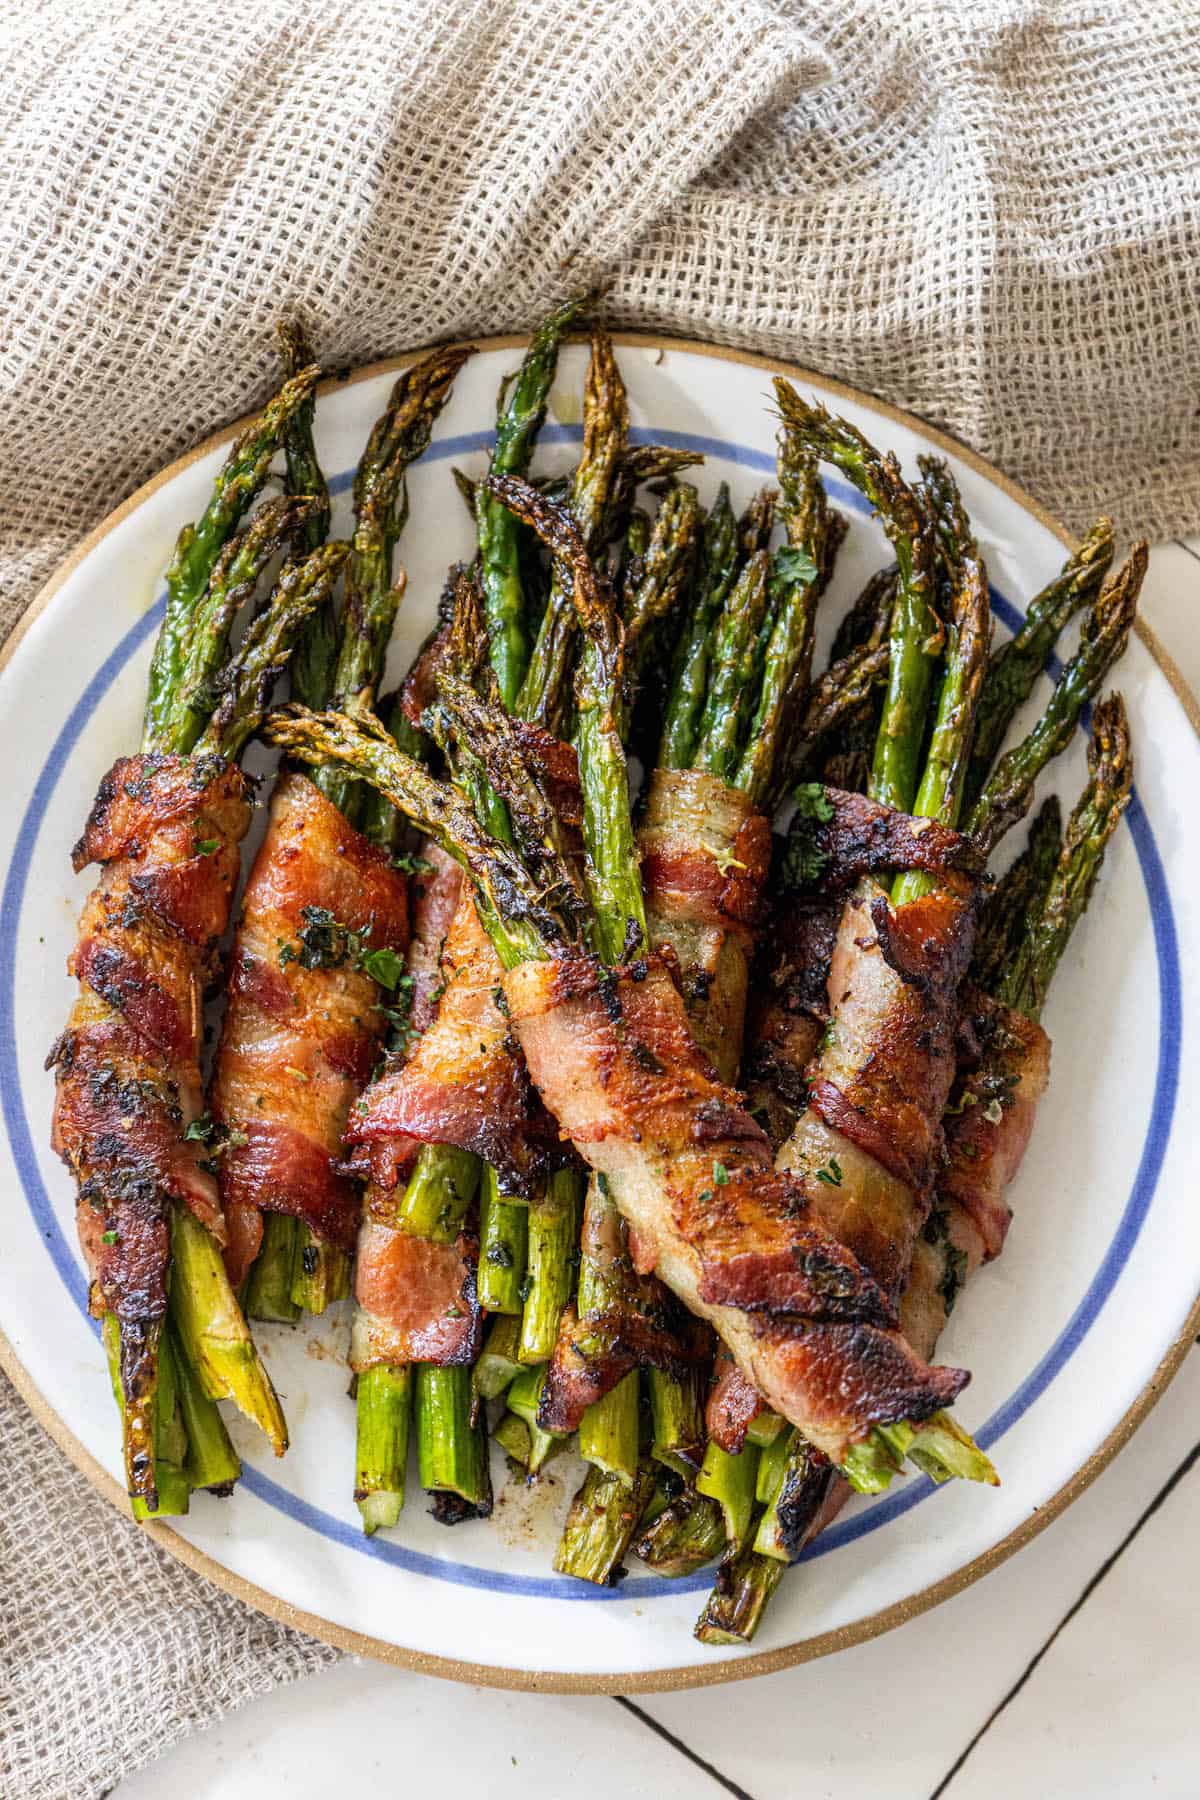 Garlic-infused bacon wrapped asparagus on a plate.